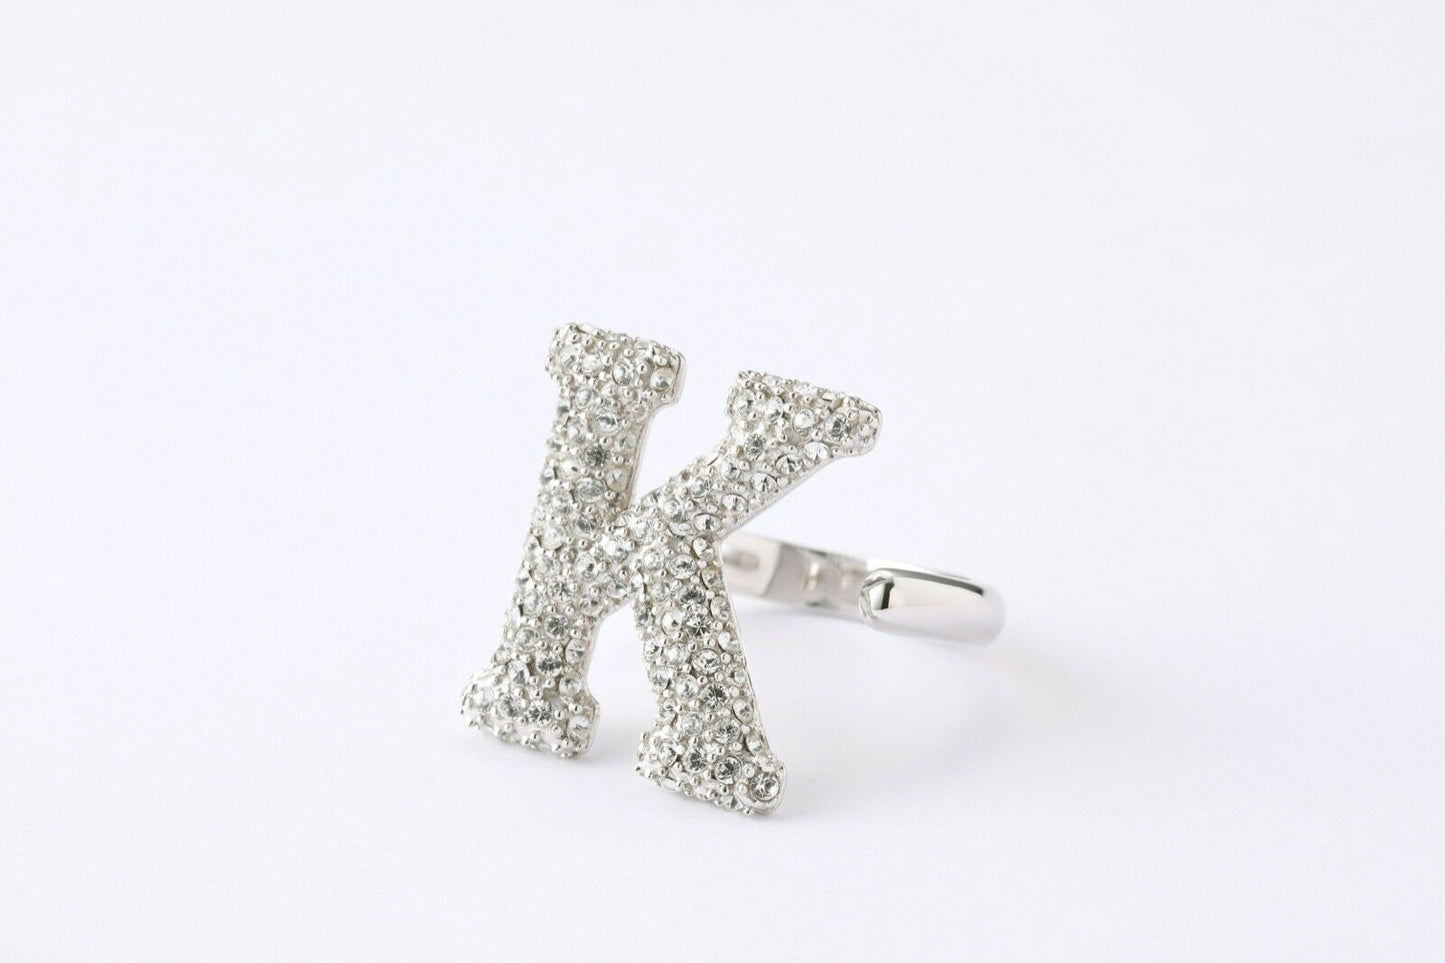 Alphabet Ring Initial K Swarovski Crystals Free Size Sterling Silver 925 Rhodium Plated